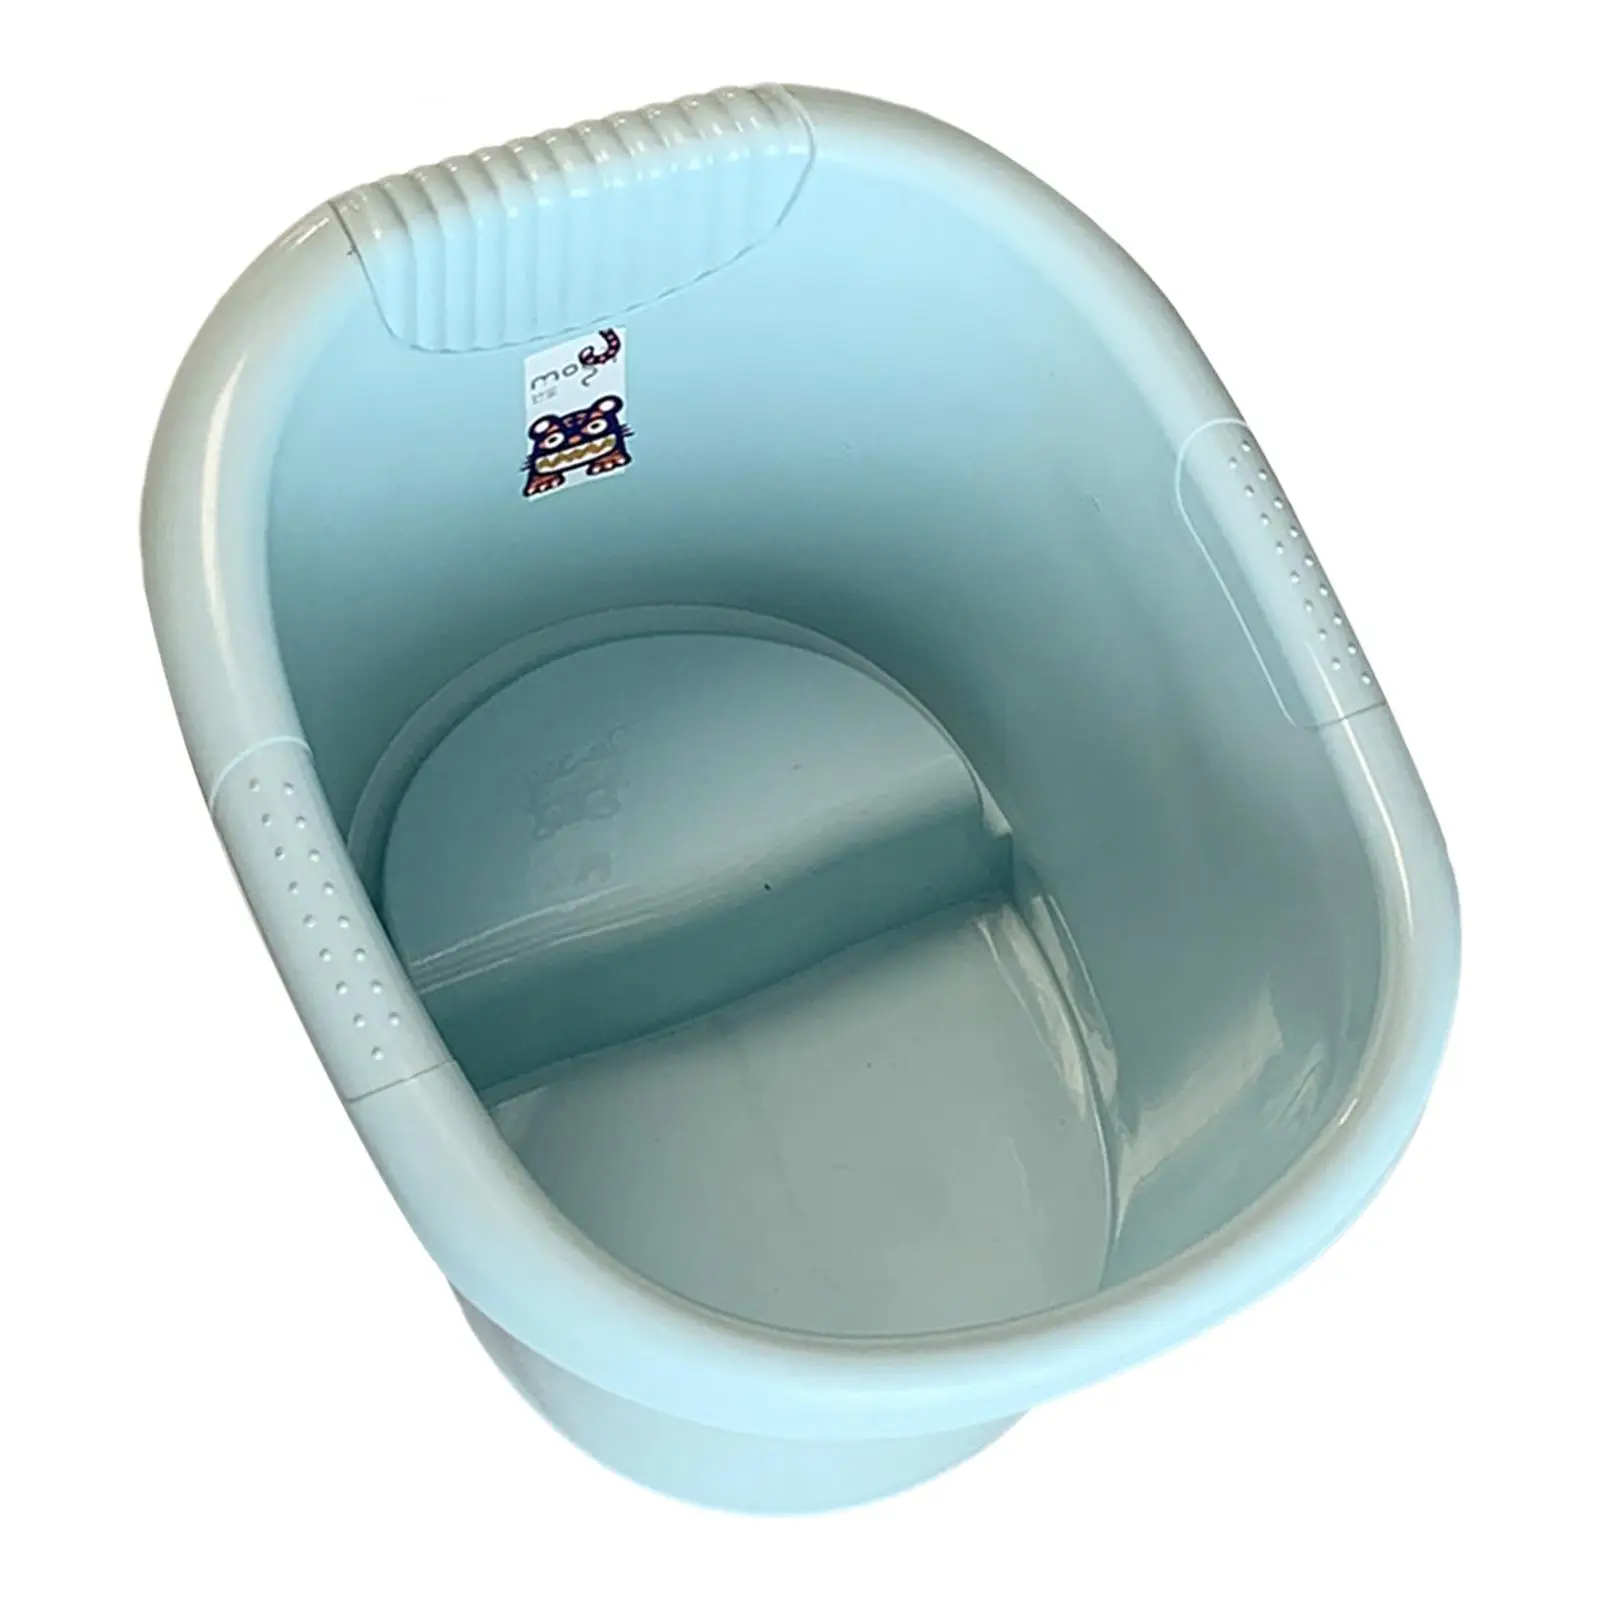 Infant Bathtub with Support Seat Tub Sitting up Bathroom Accessories Baby Bath Bucket for Toddlers Baby Boys Kids Newborn